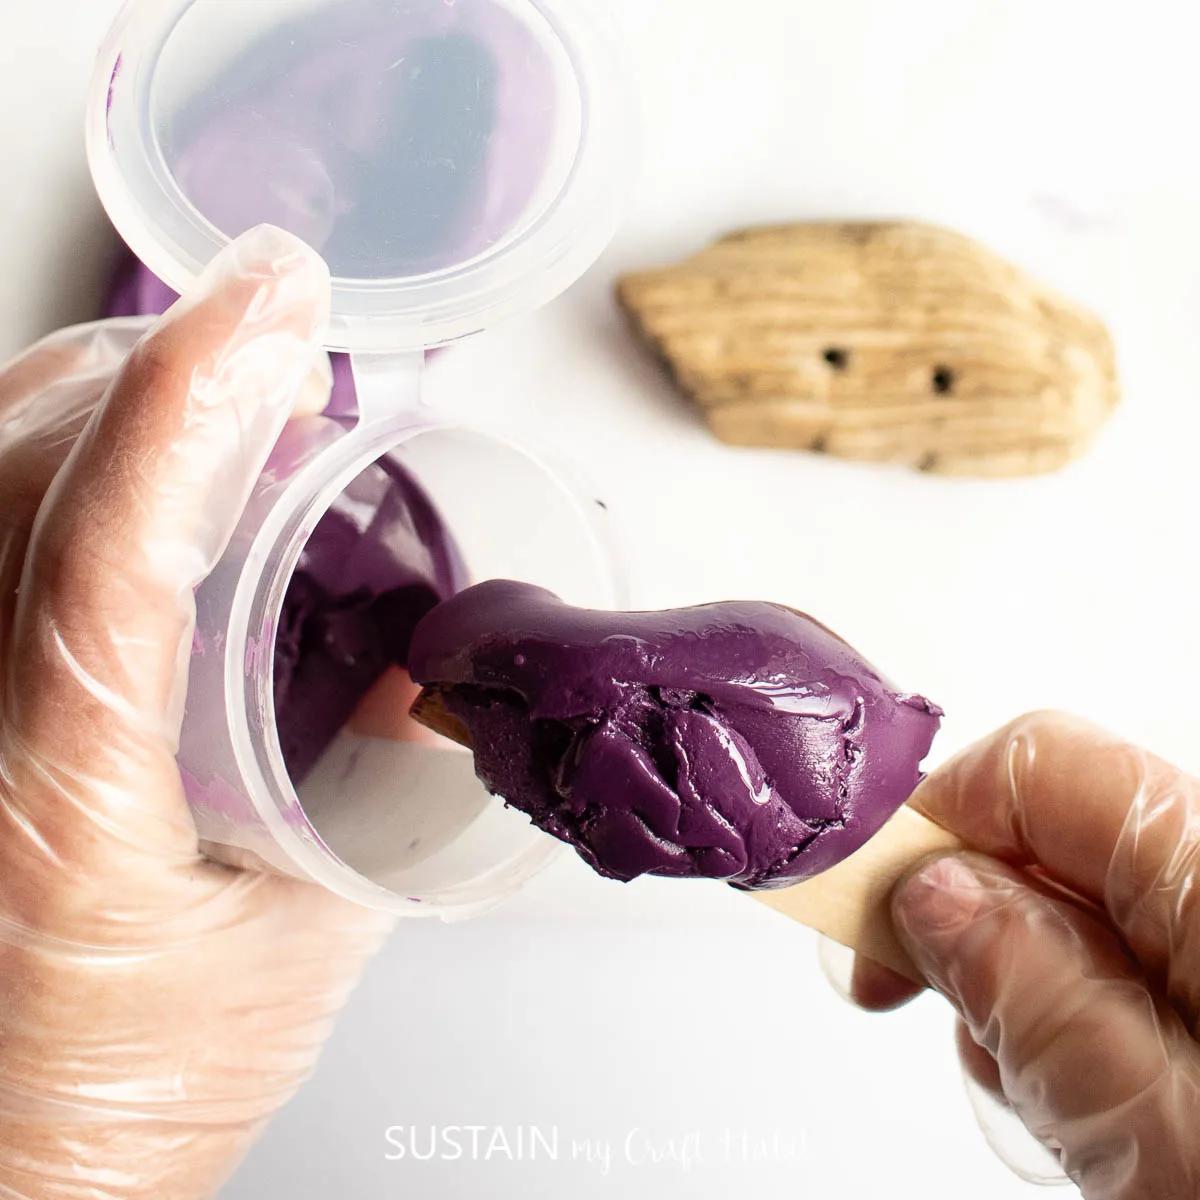 Scooping out purple silicone putty from a container.